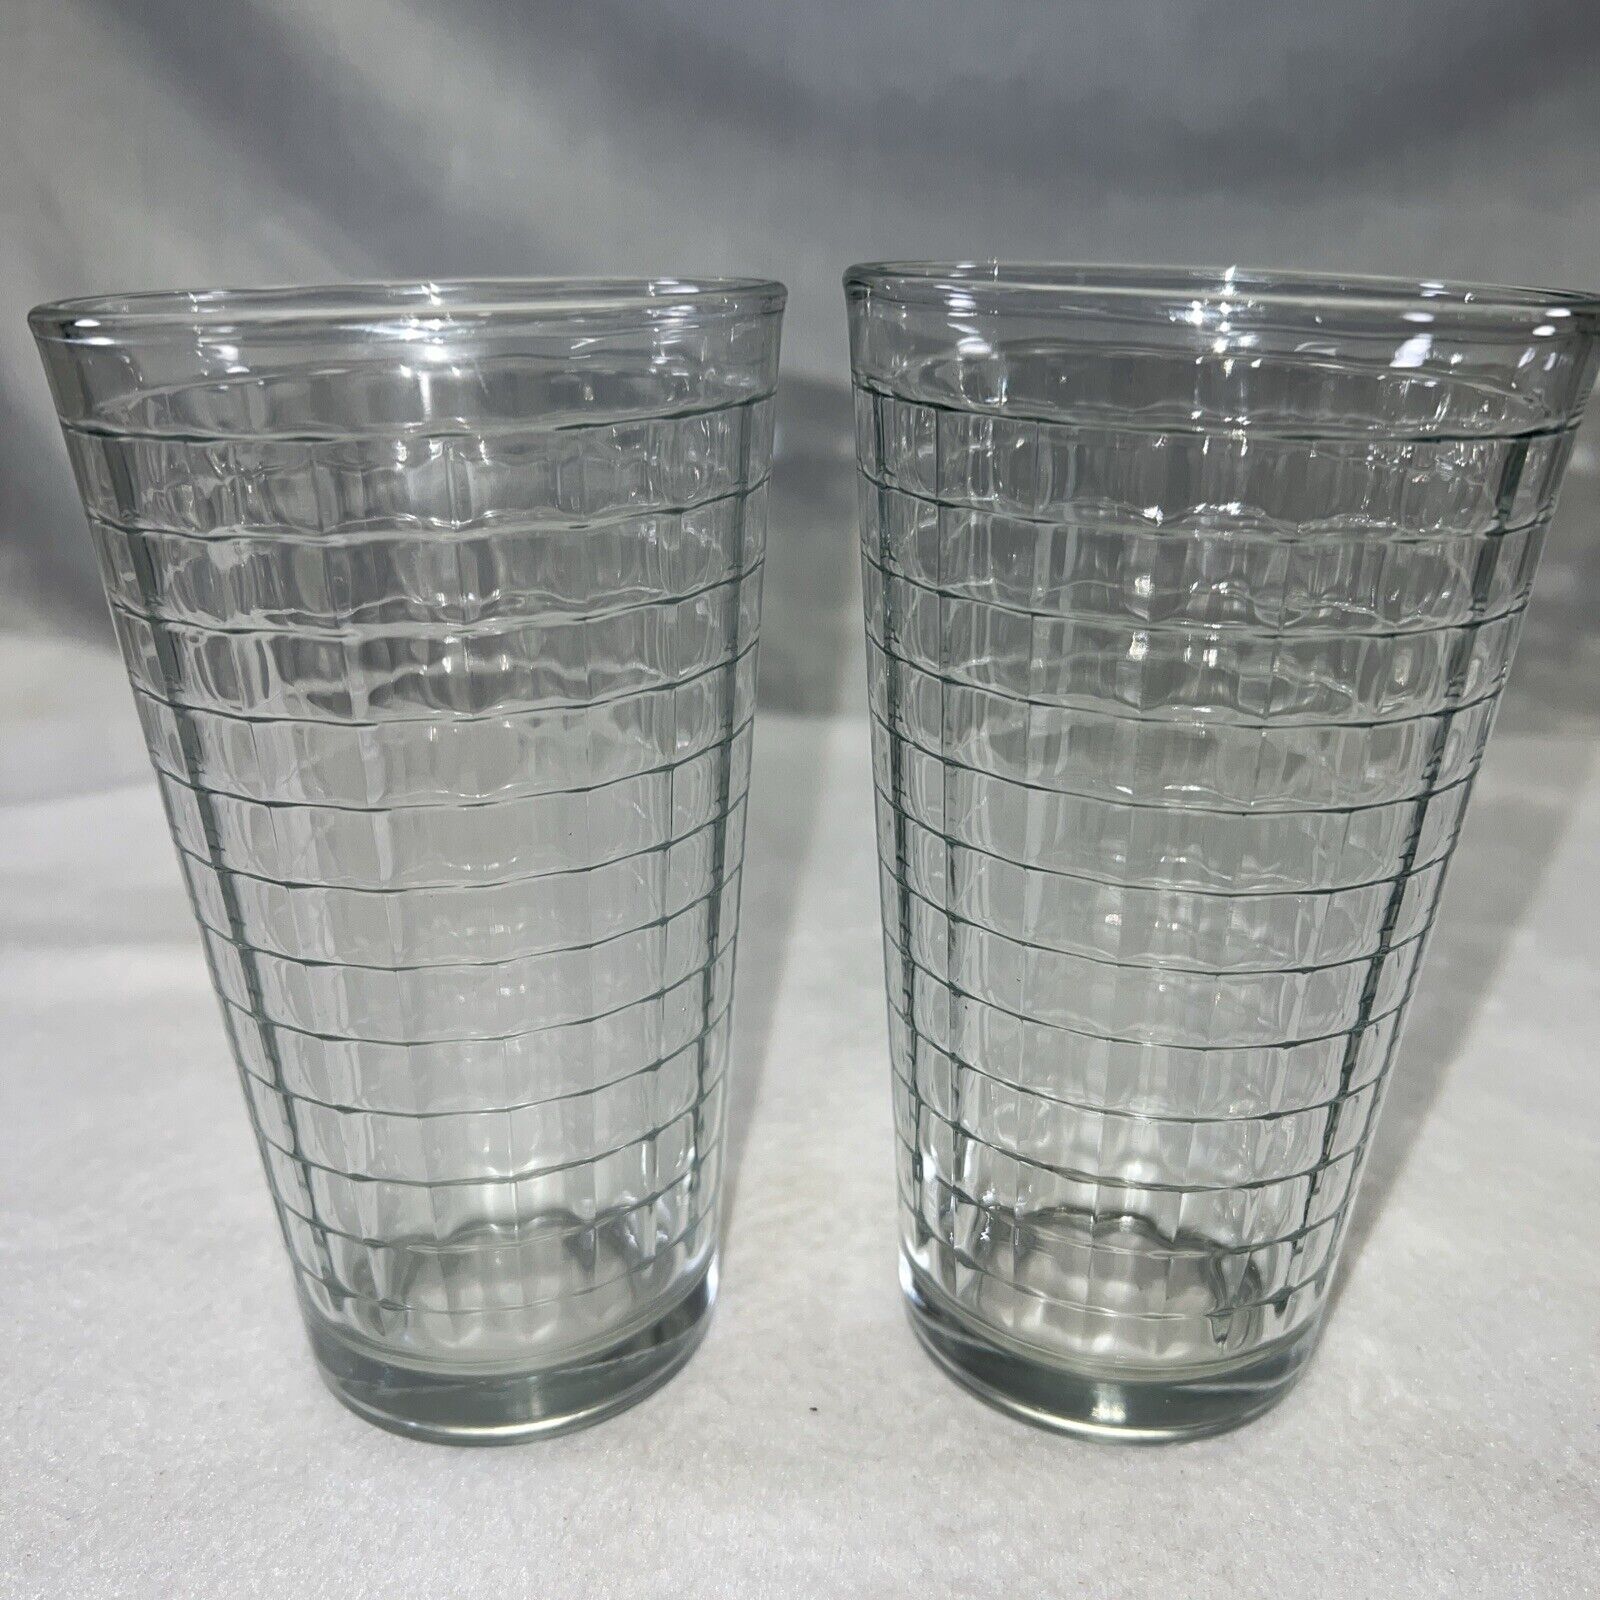 Pair of 2 Pasabahce Style 16oz Tumblers Block Optic Clear Drinking Glasses VTG